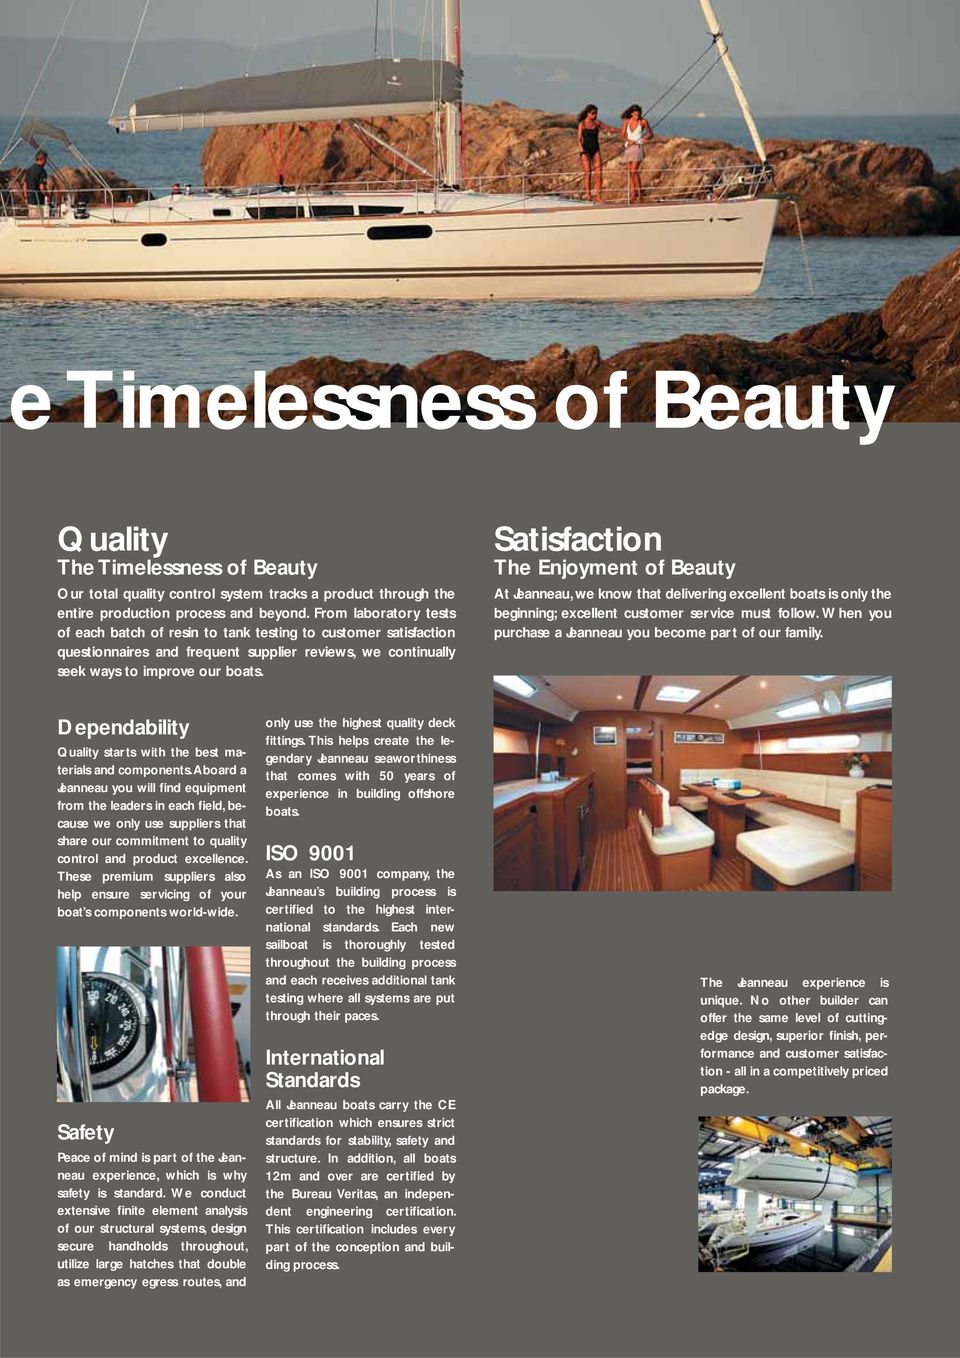 Satisfaction The Enjoyment of Beauty At Jeanneau, we know that delivering excellent boats is only the beginning; excellent customer service must follow.